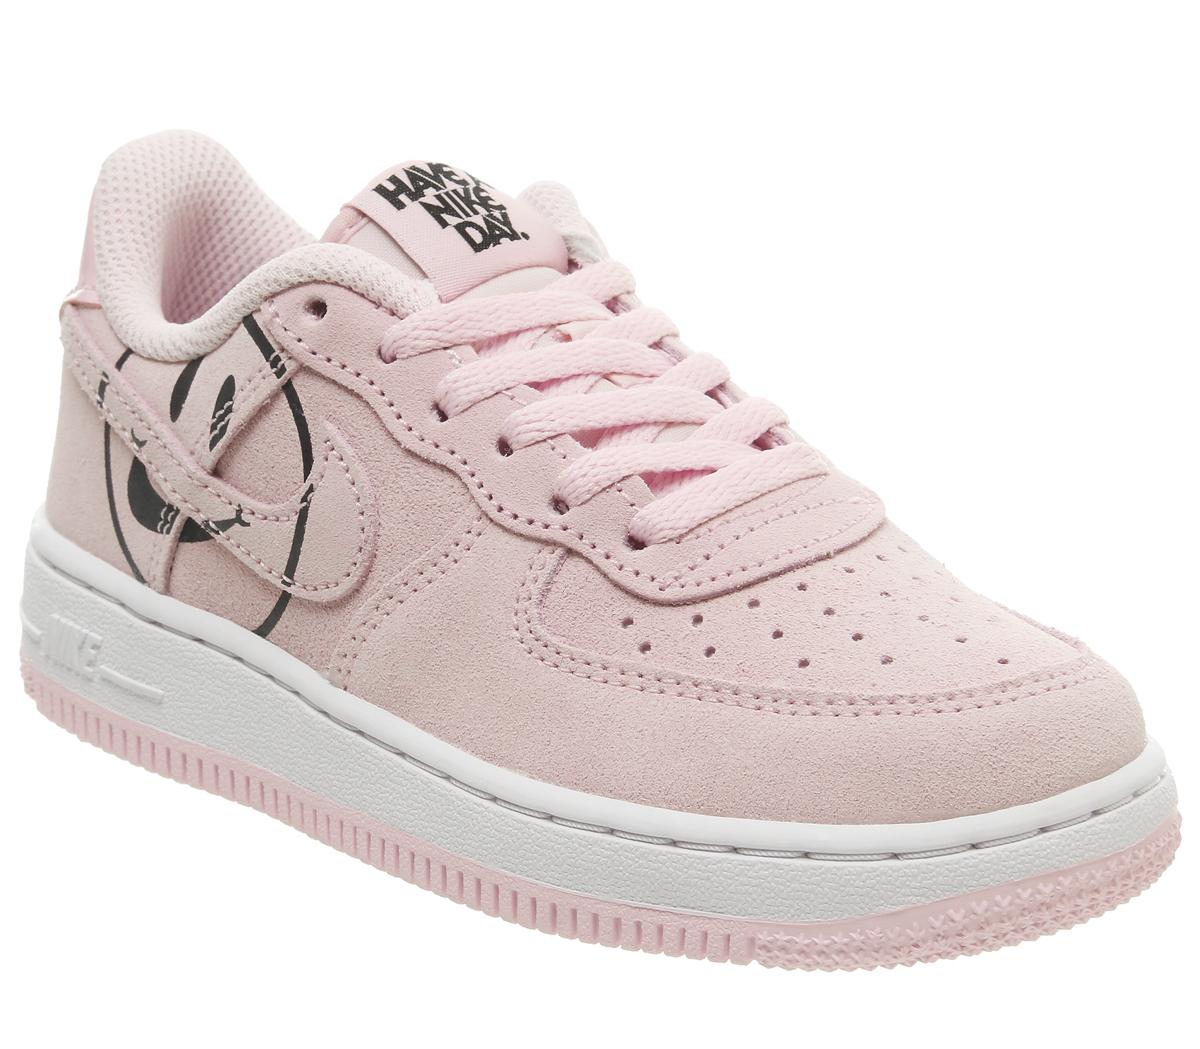 NikeAir Force 1 Lv8 Ps TrainersPink Foam White Smile